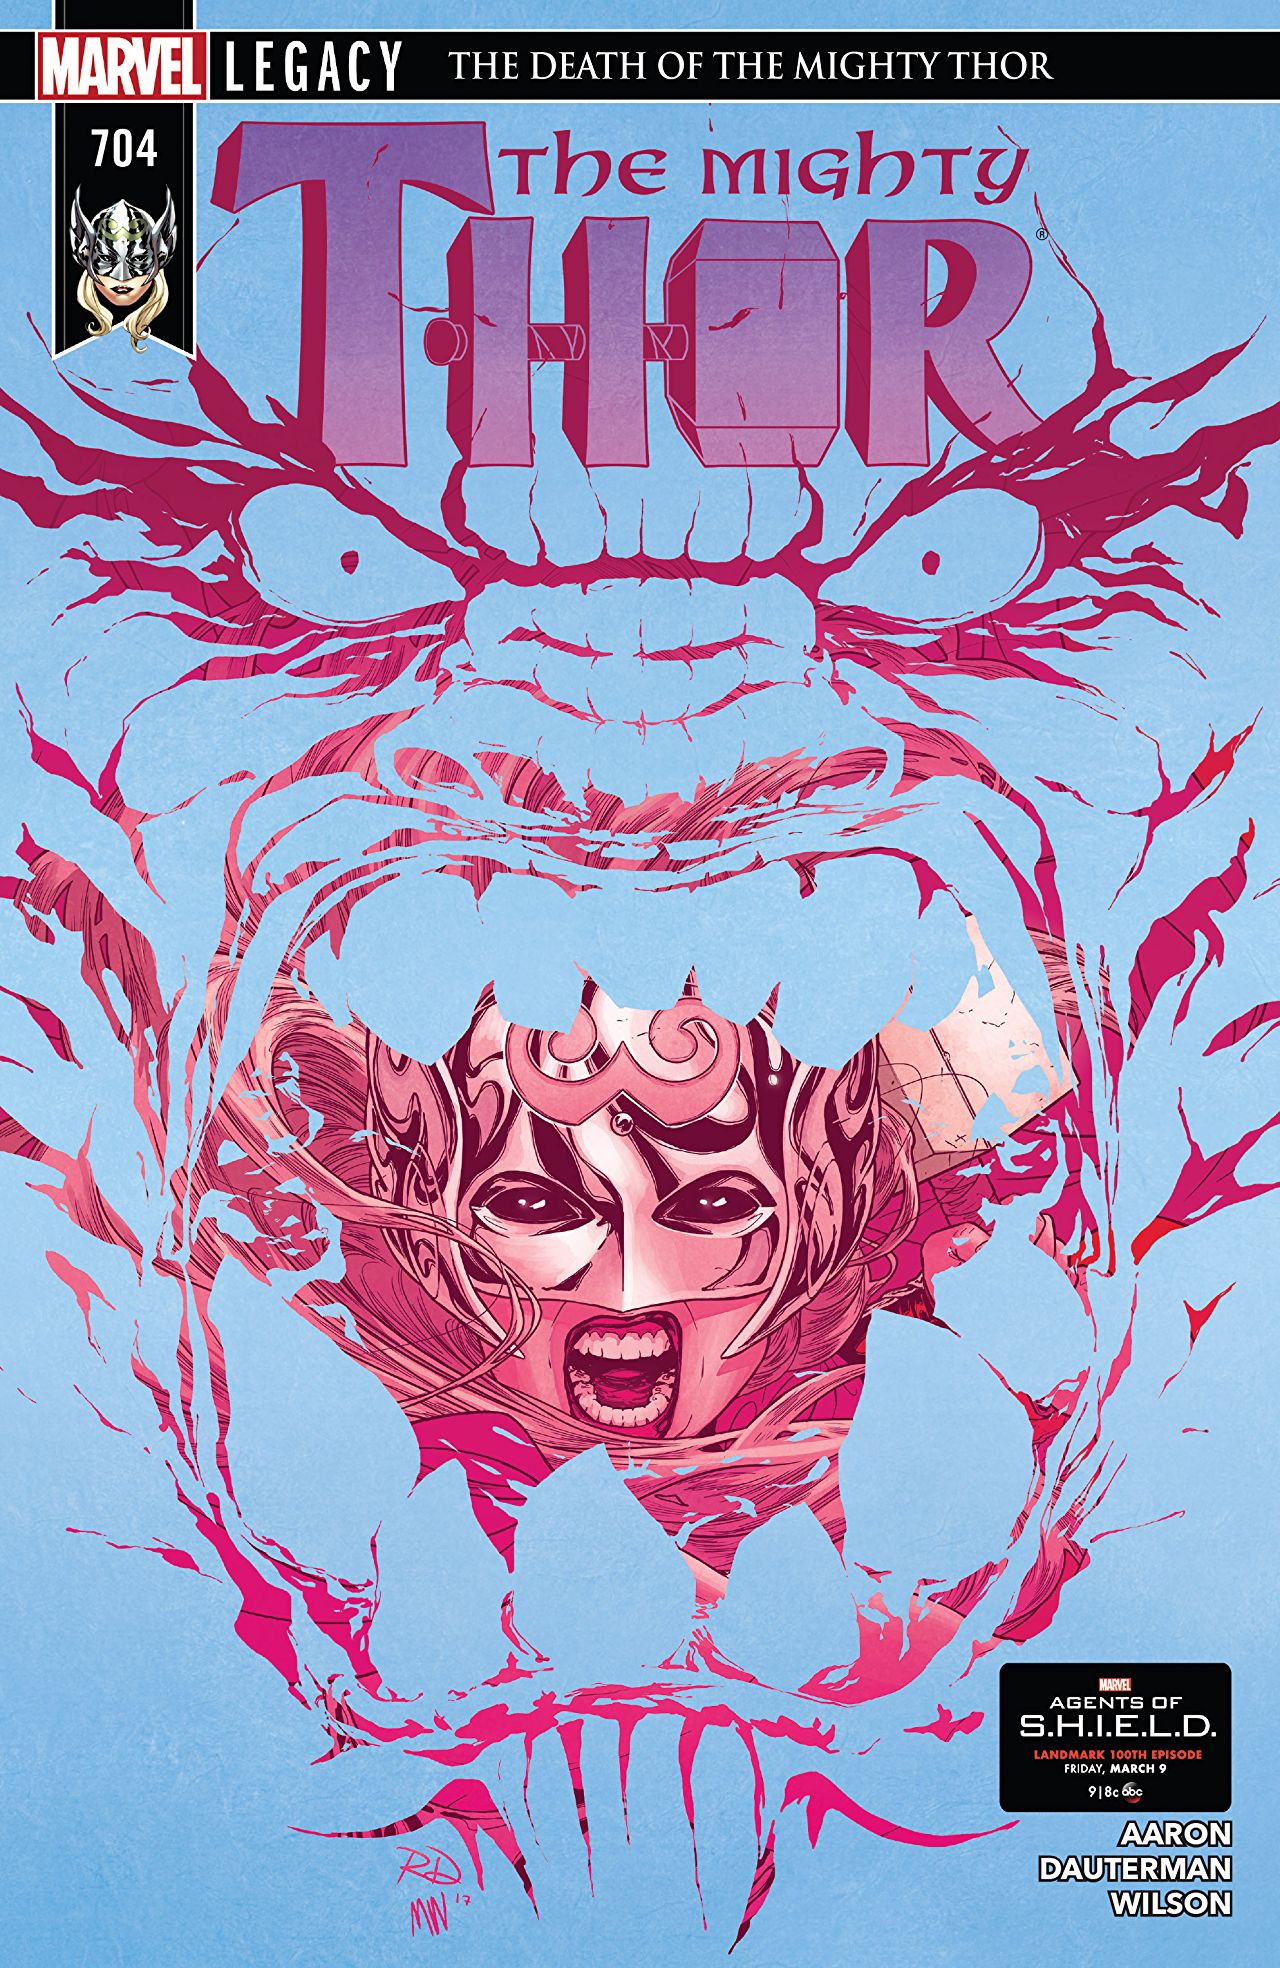 The Mighty Thor #704 Review